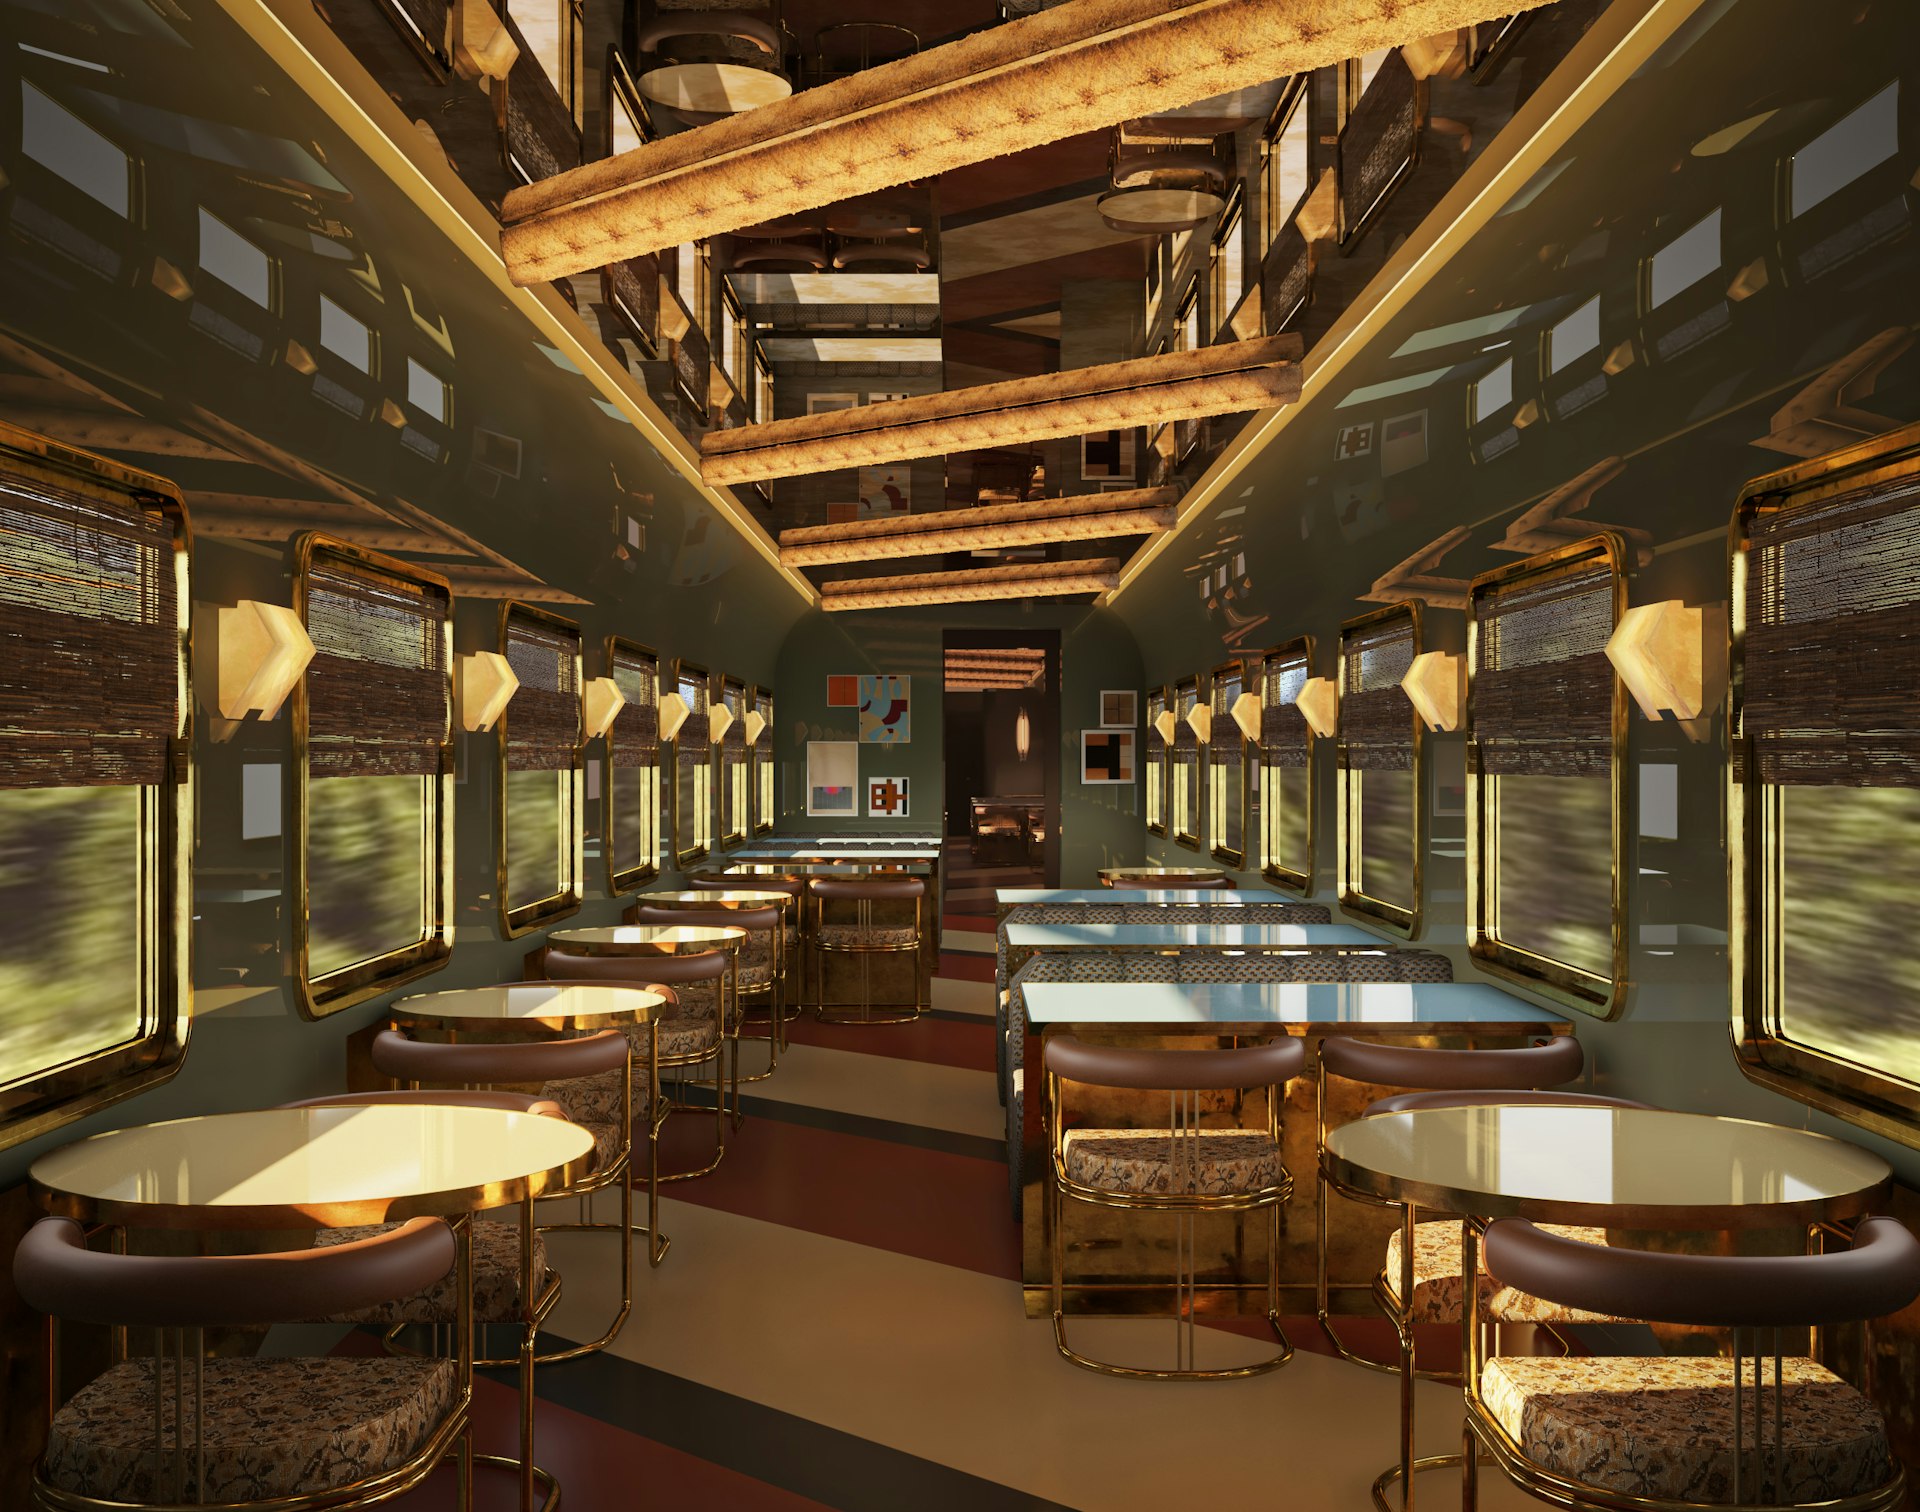 A rendering of the restaurant inside the new Orient Express La Dolce Vita train